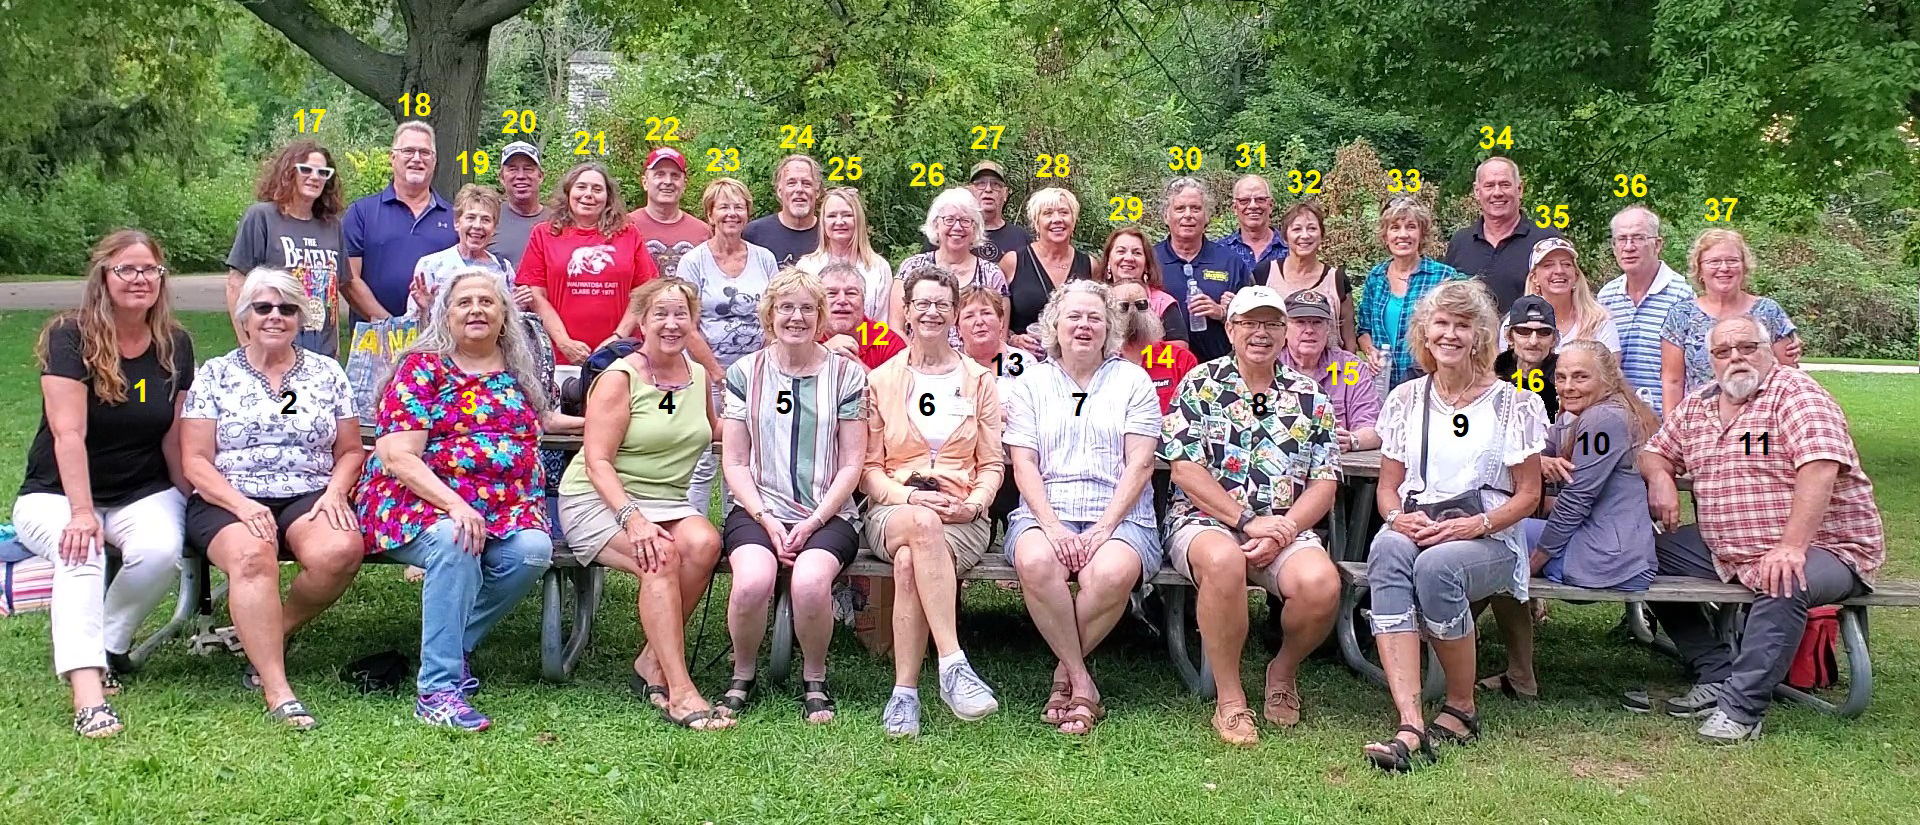 46th Reunion Group Picture with Key